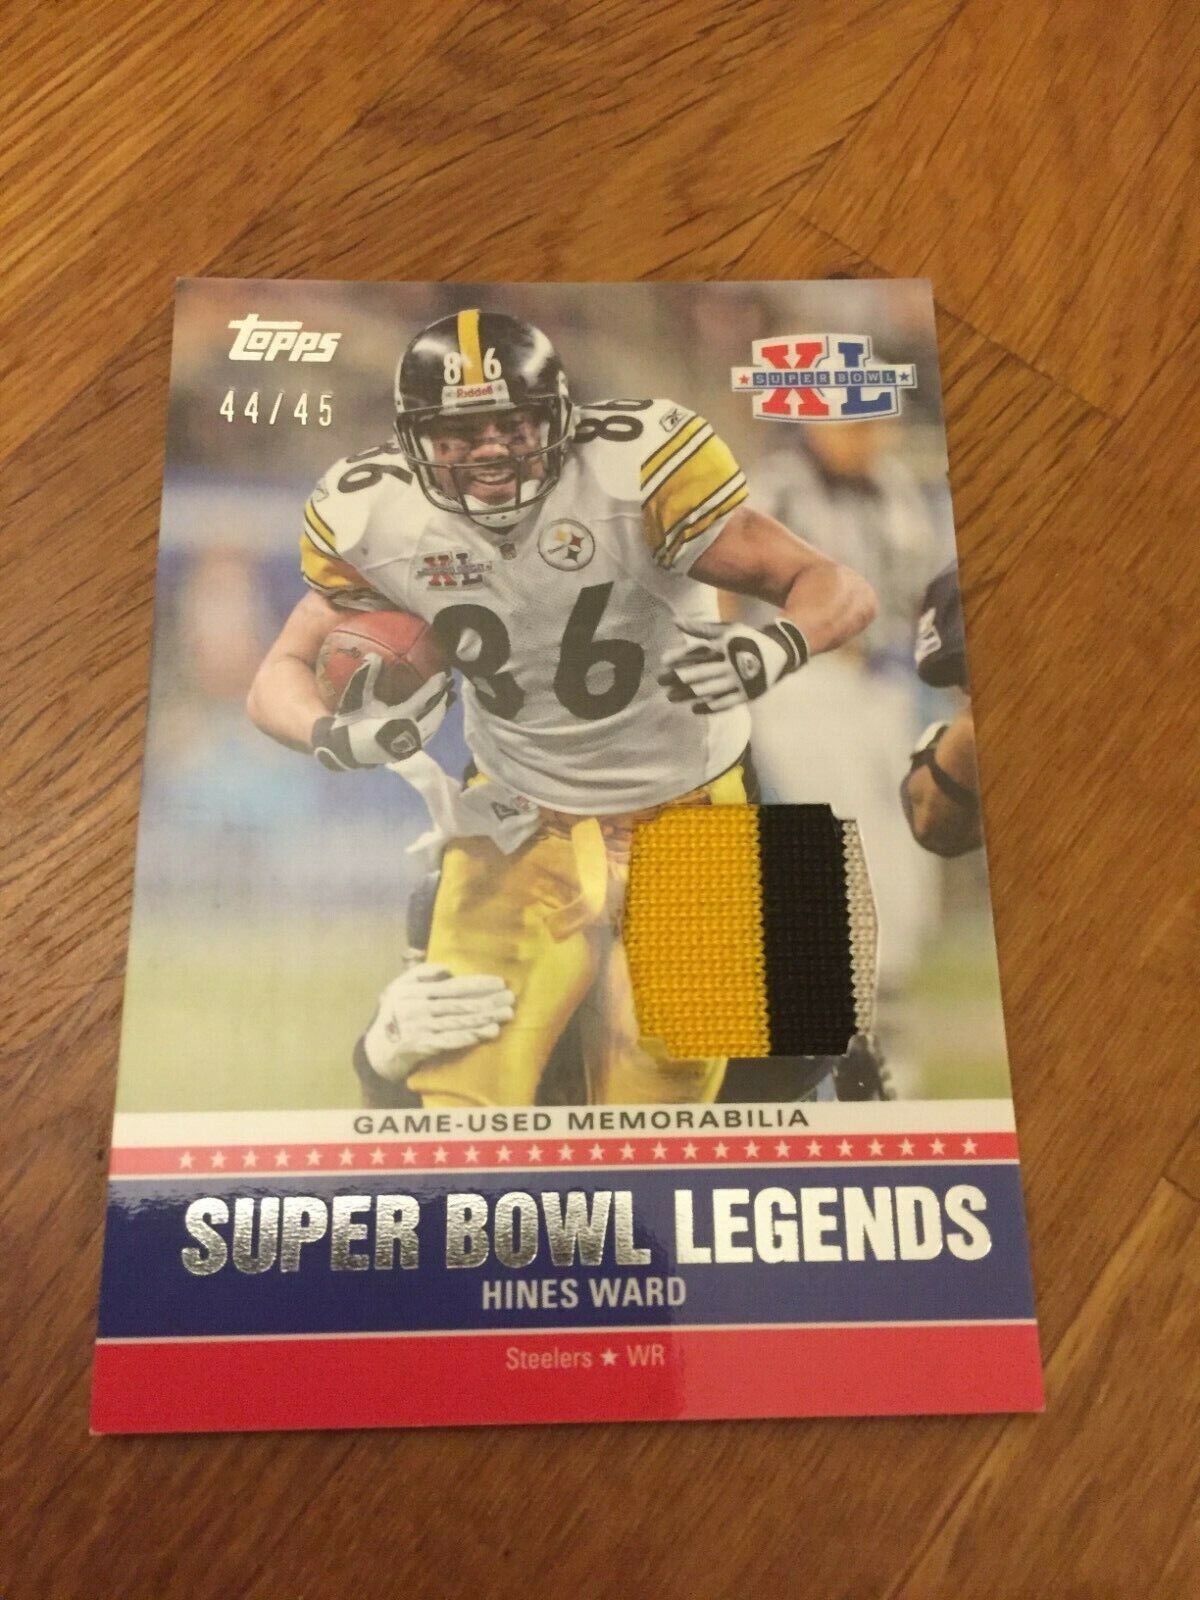 2011 Topps Super Bowl Legends Hines Ward 44/45 Steelers 2 col patch card